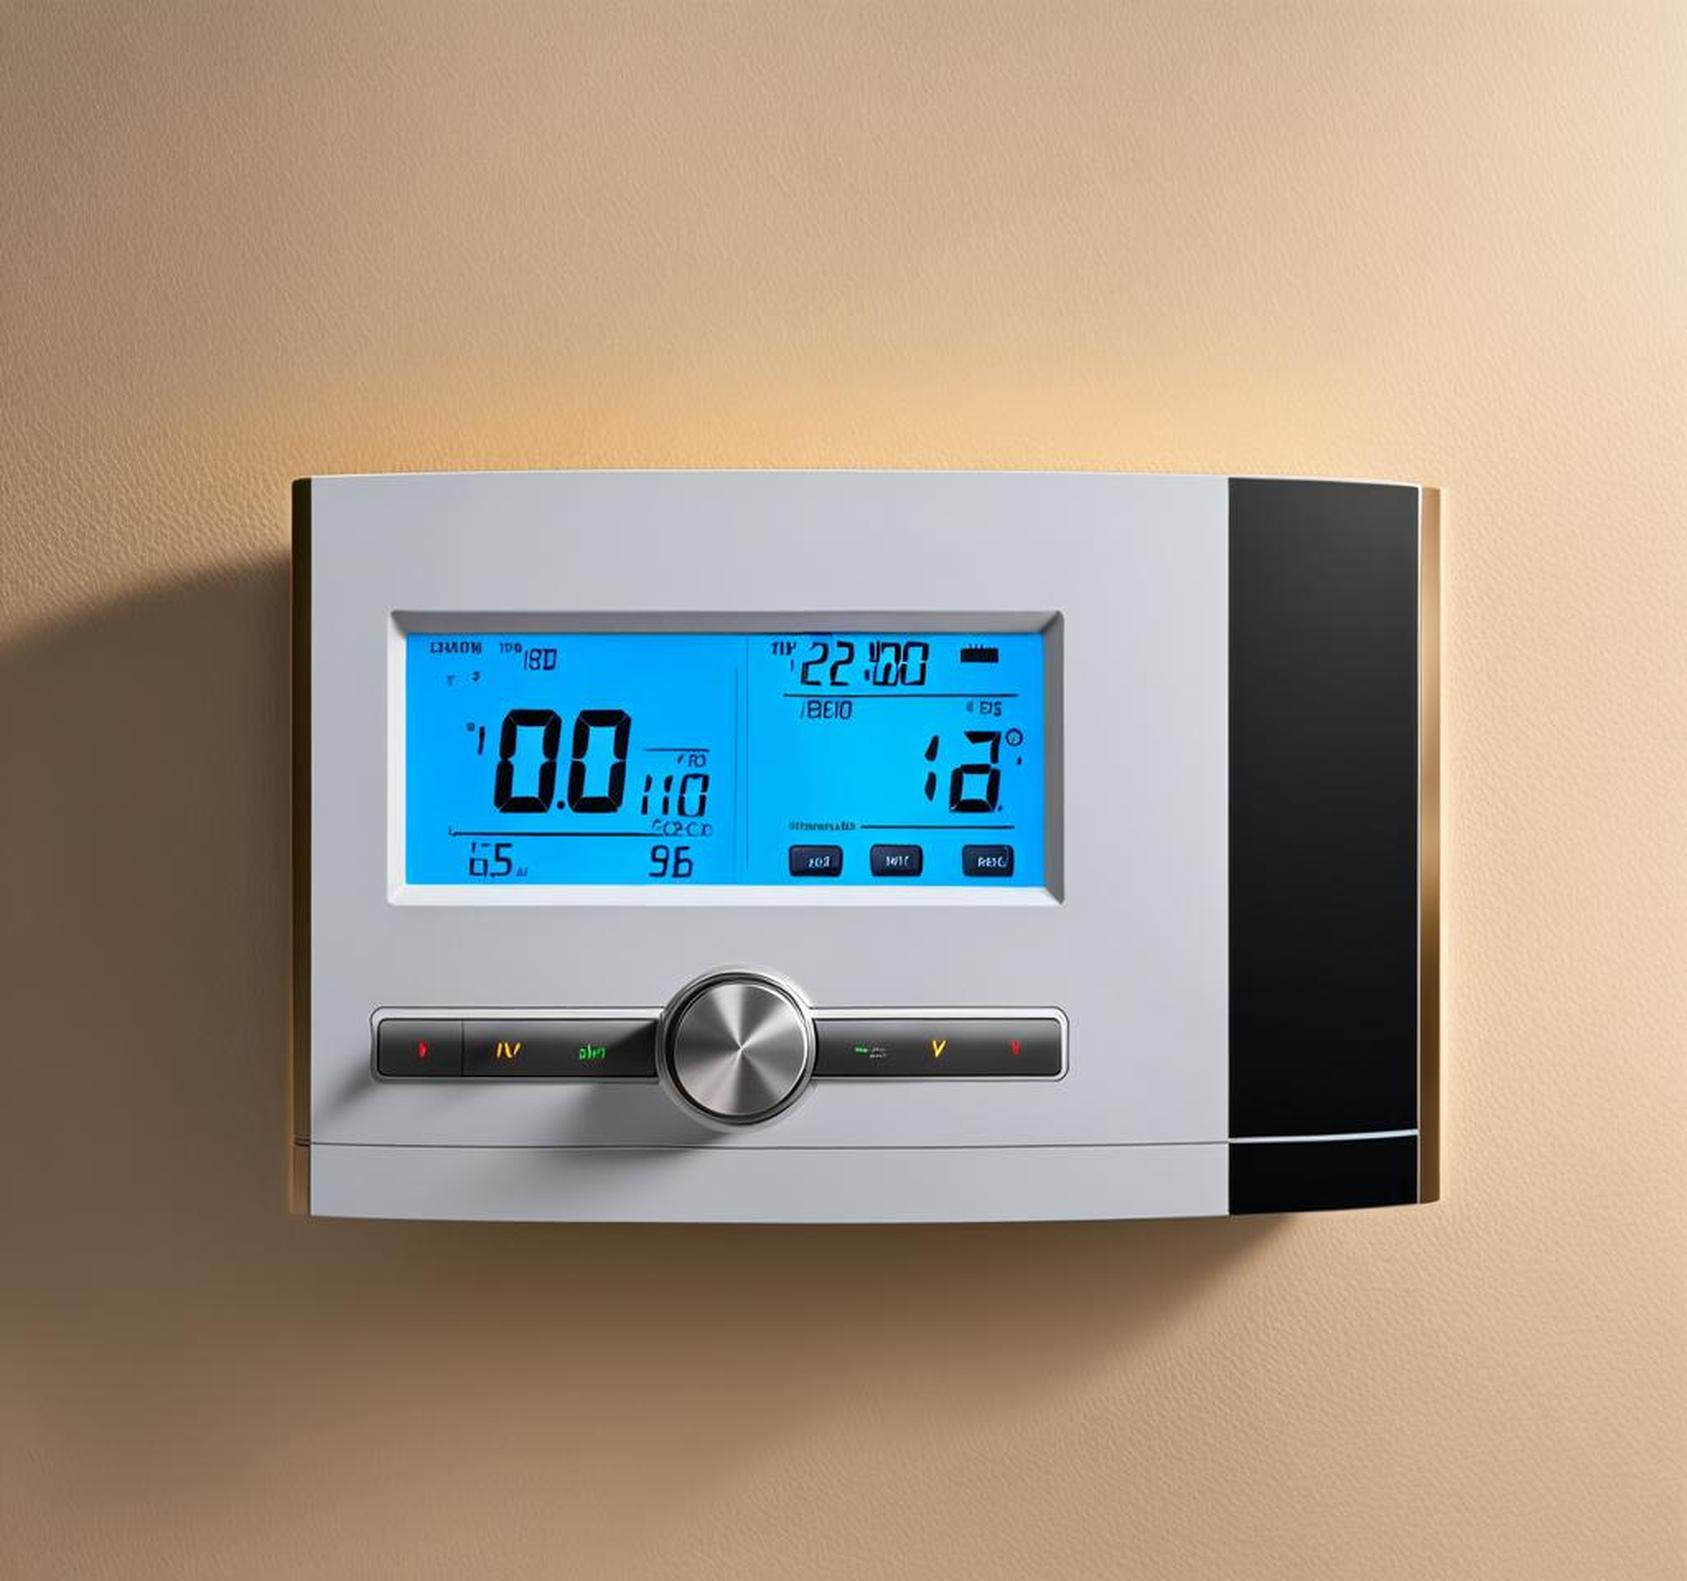 thermostat display not working